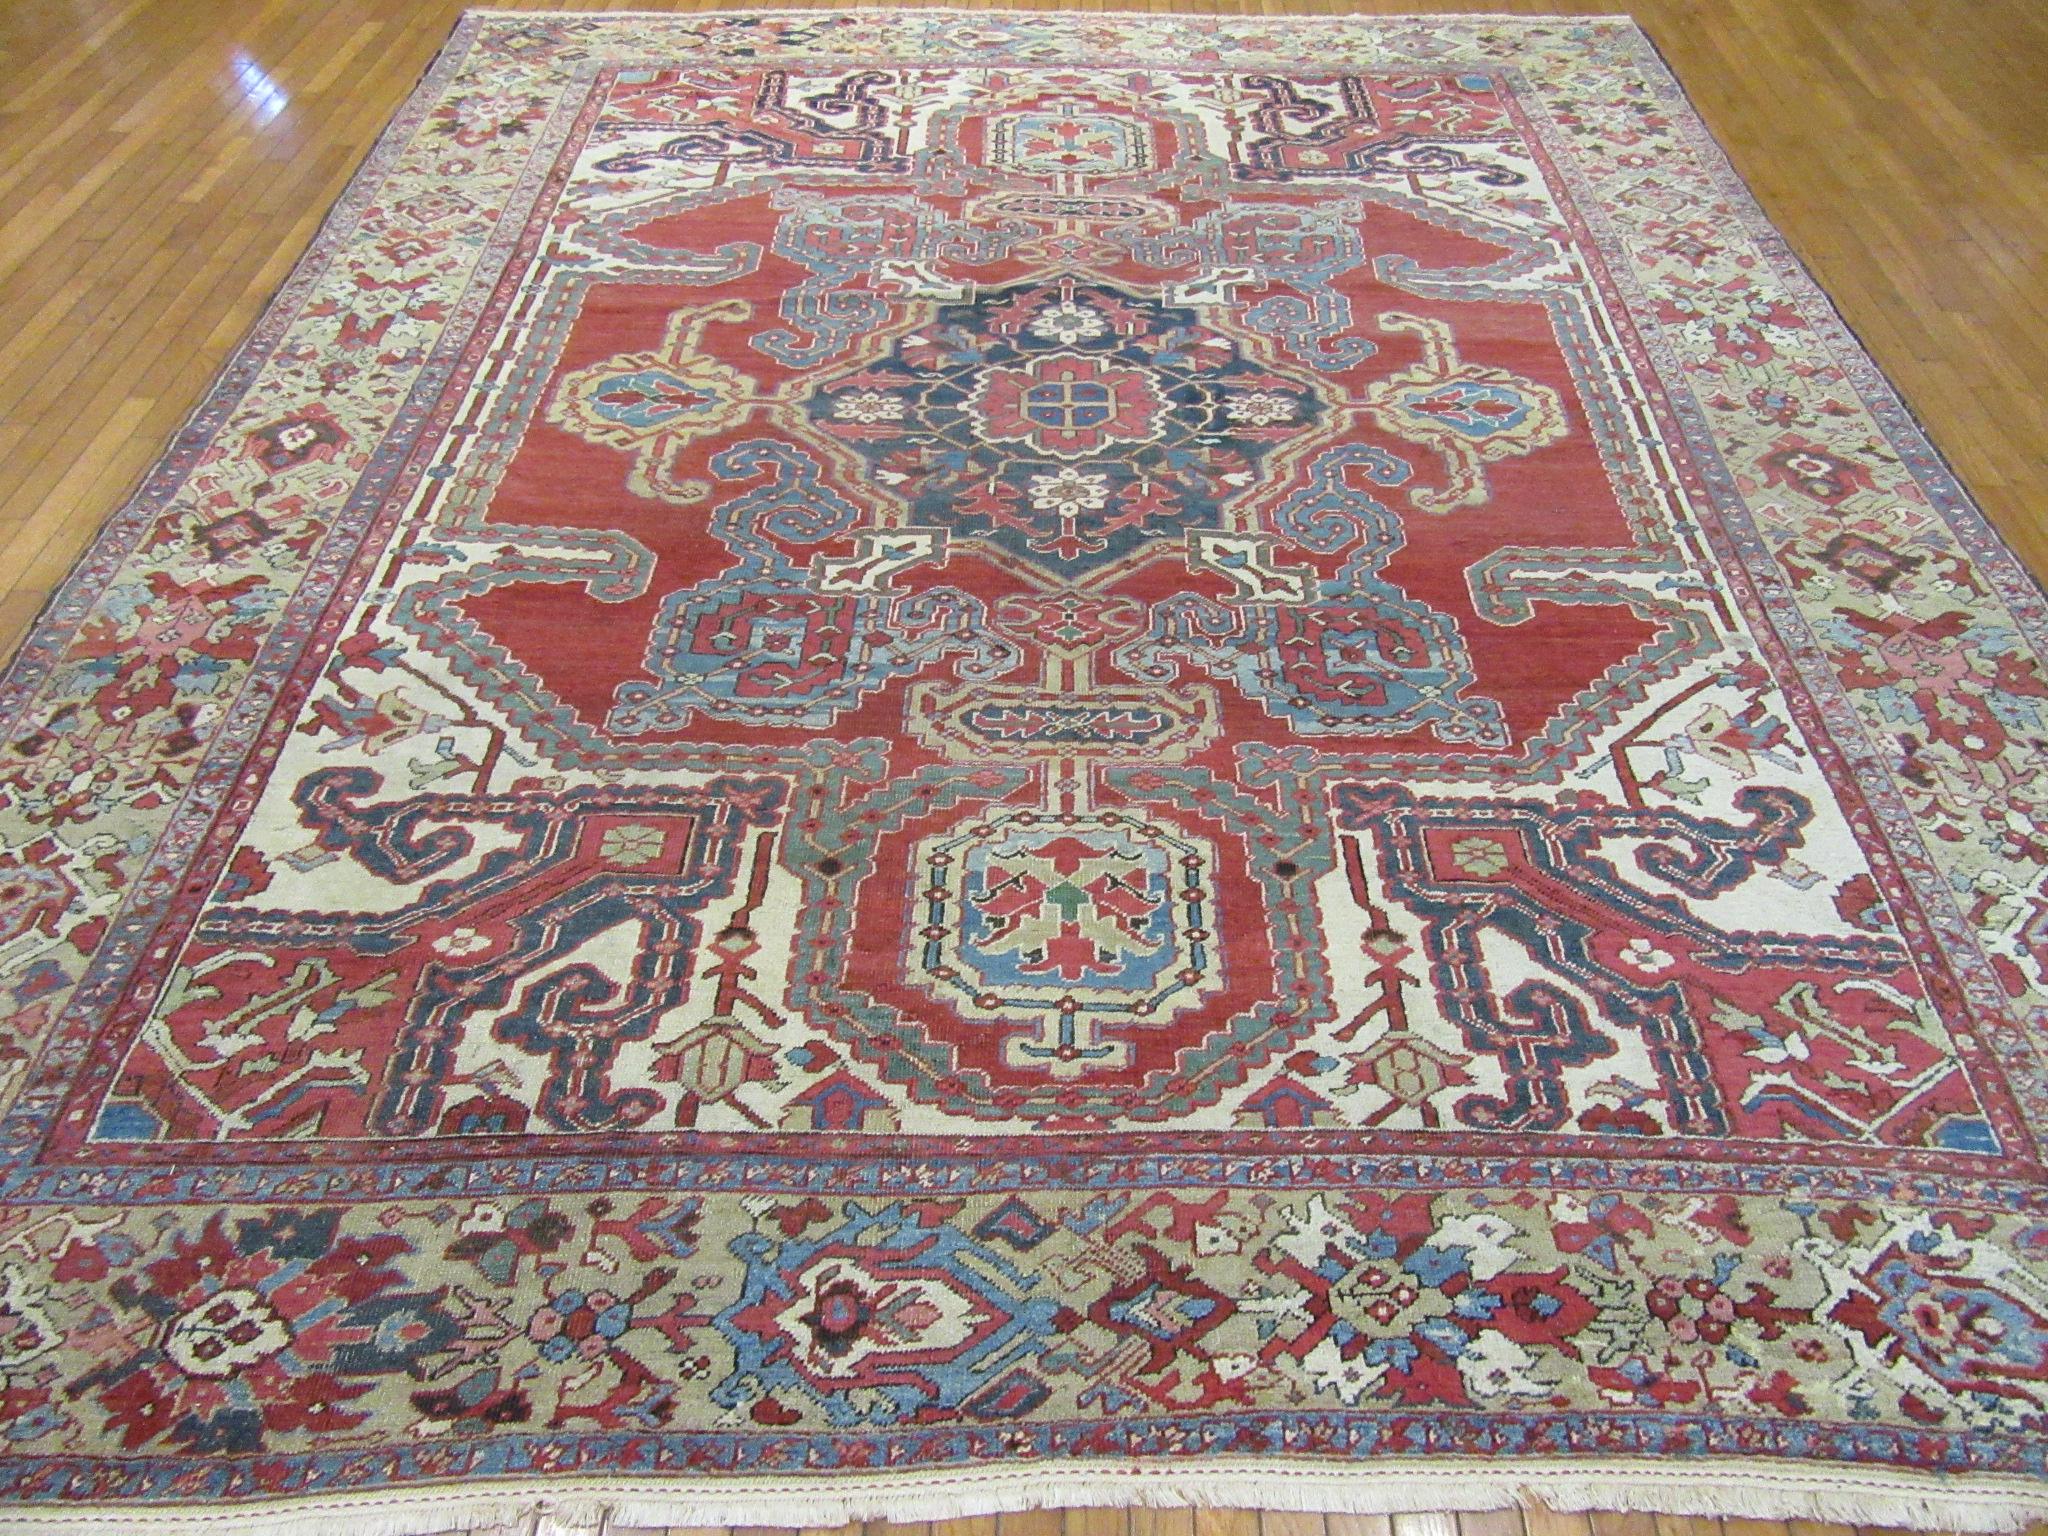 This is a Classic antique hand knotted Persian Heriz rug. It is made with wool pile and cotton foundation. The rug has the trade mark central and corner medallion geometric Heriz pattern in primary colors of red, blue and beige made with natural